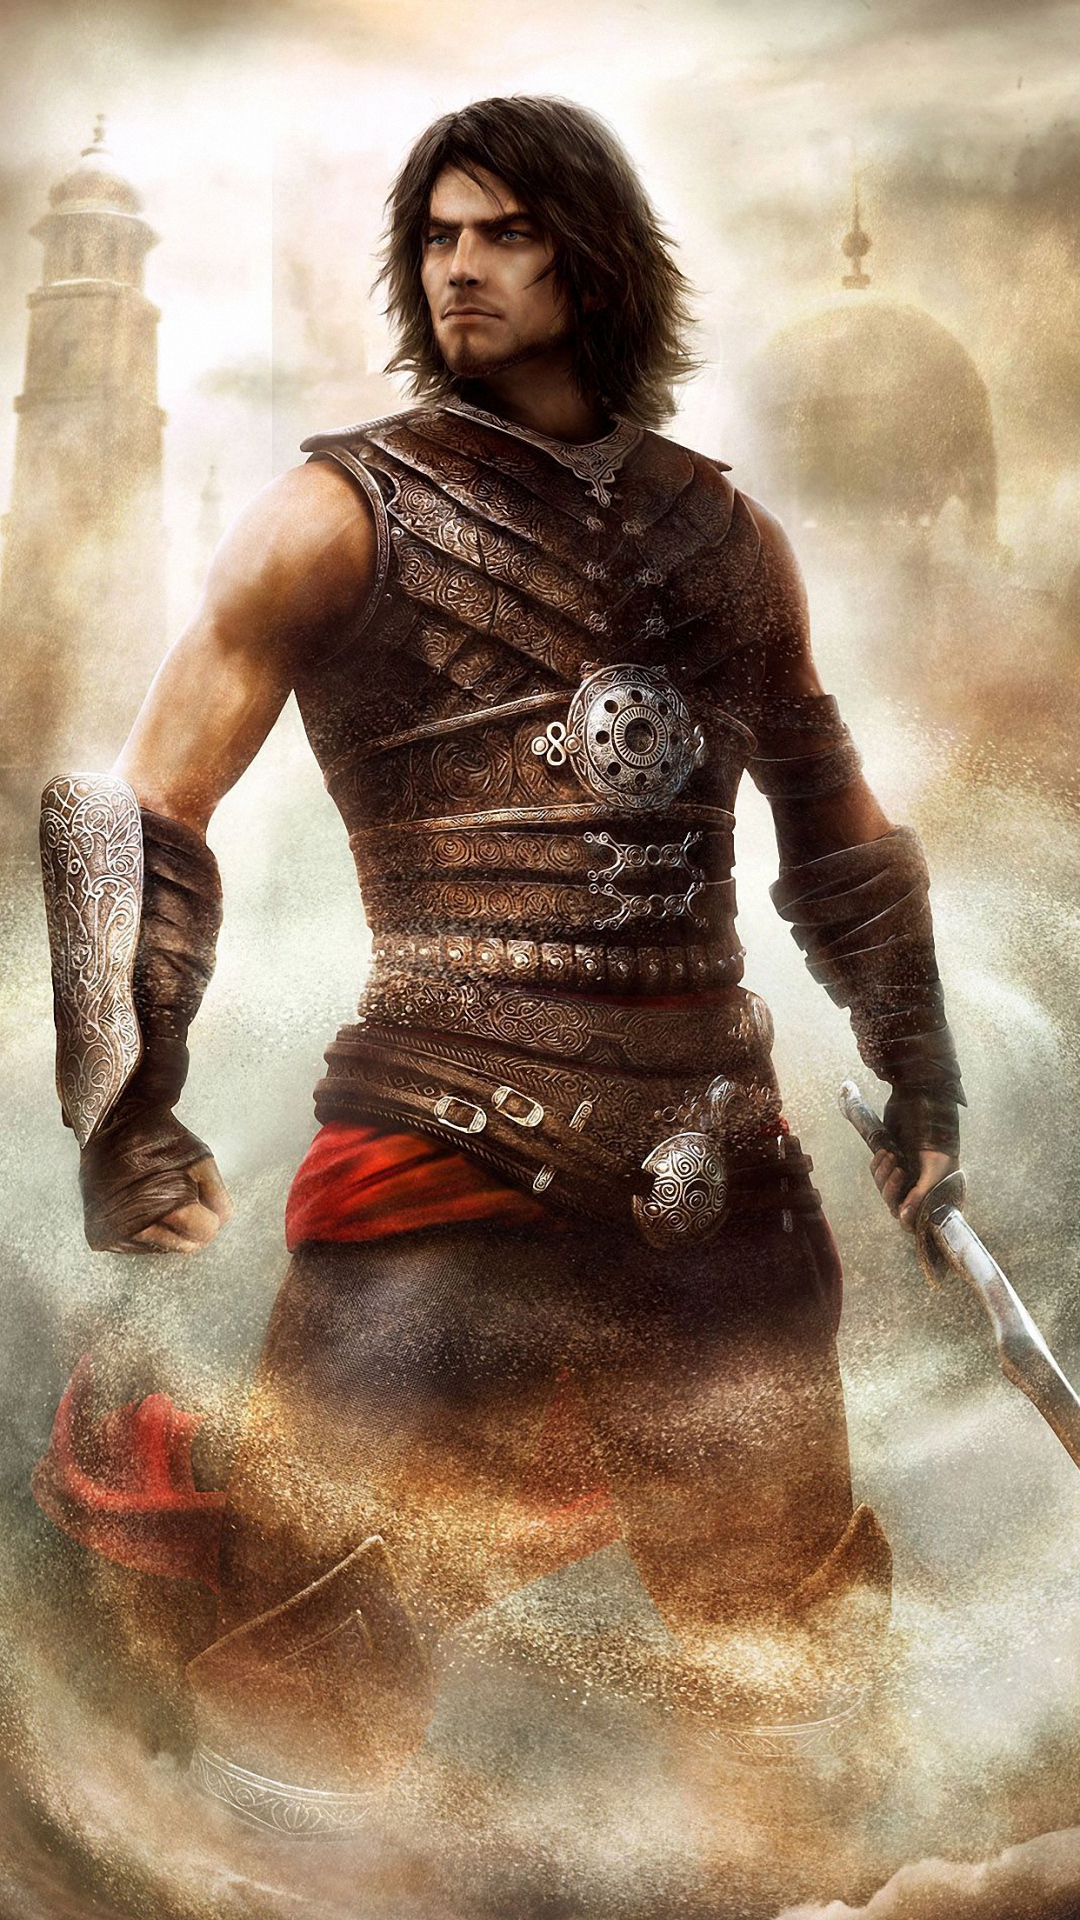 Prince Of Persia Game Iphone 6 Wallpapers Hd - Games Hd Wallpapers Mobile -  1080x1920 Wallpaper 